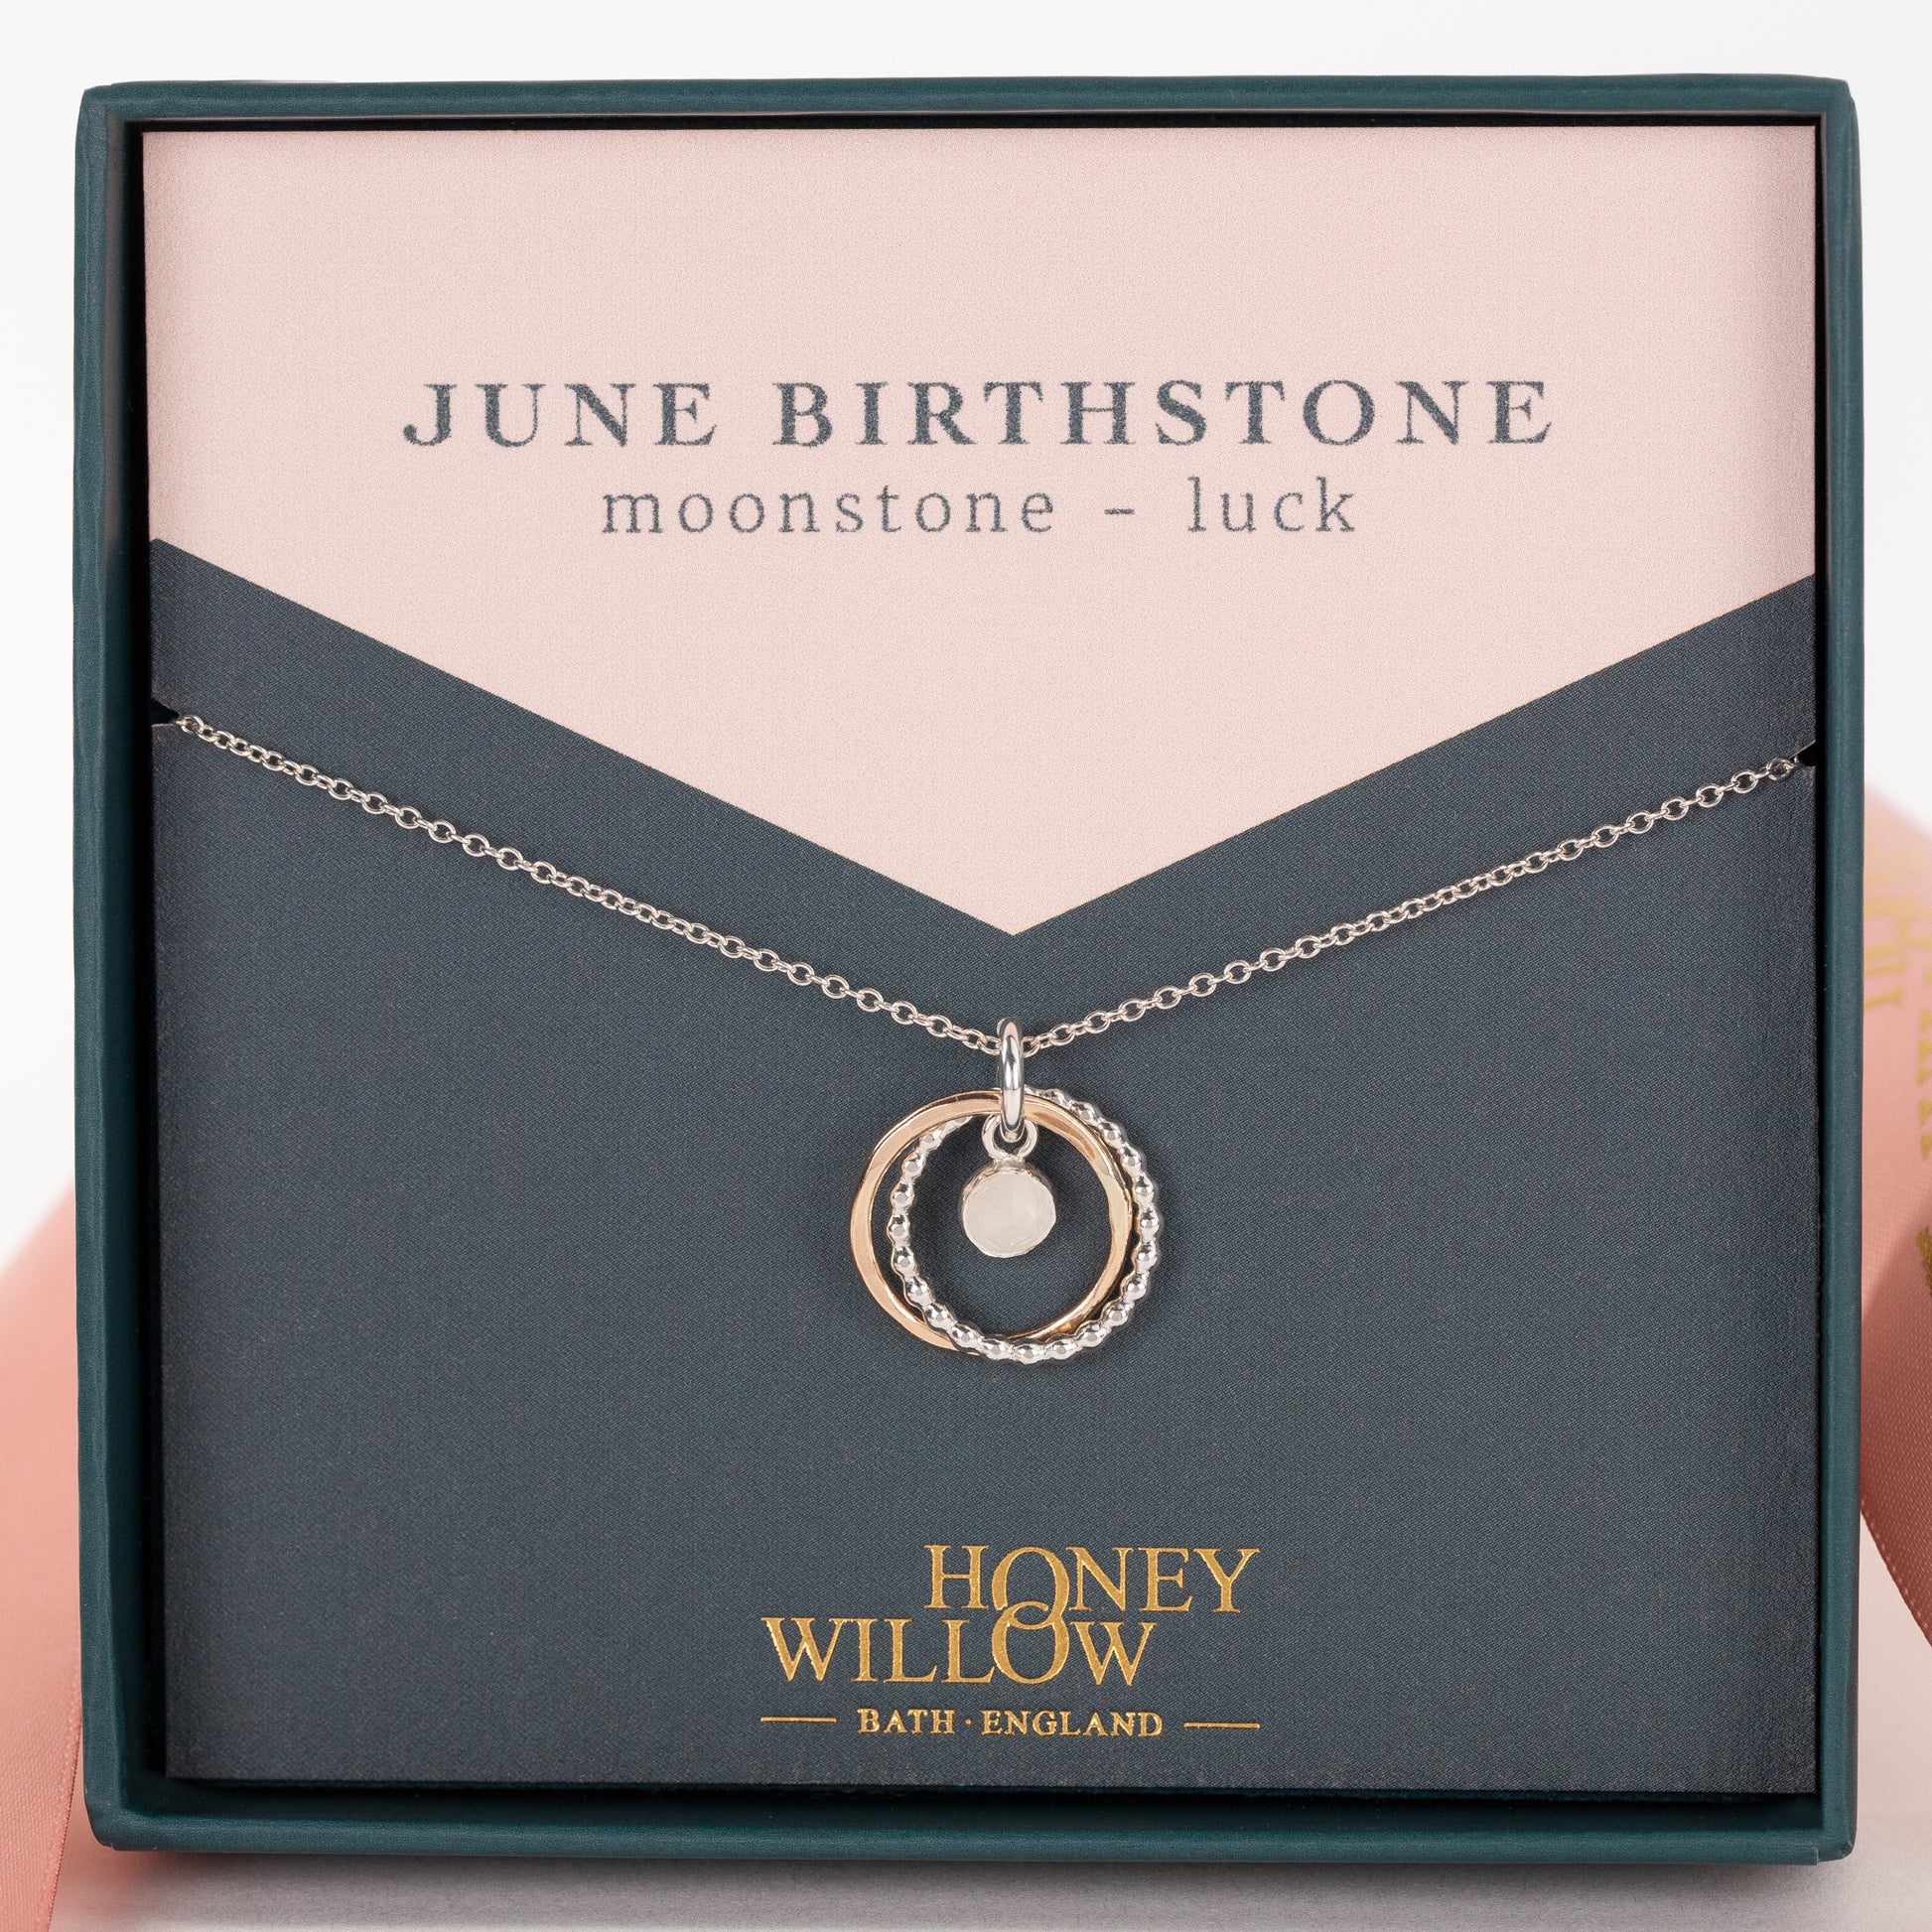 June Birthstone Necklace - Moonstone - Silver & Gold